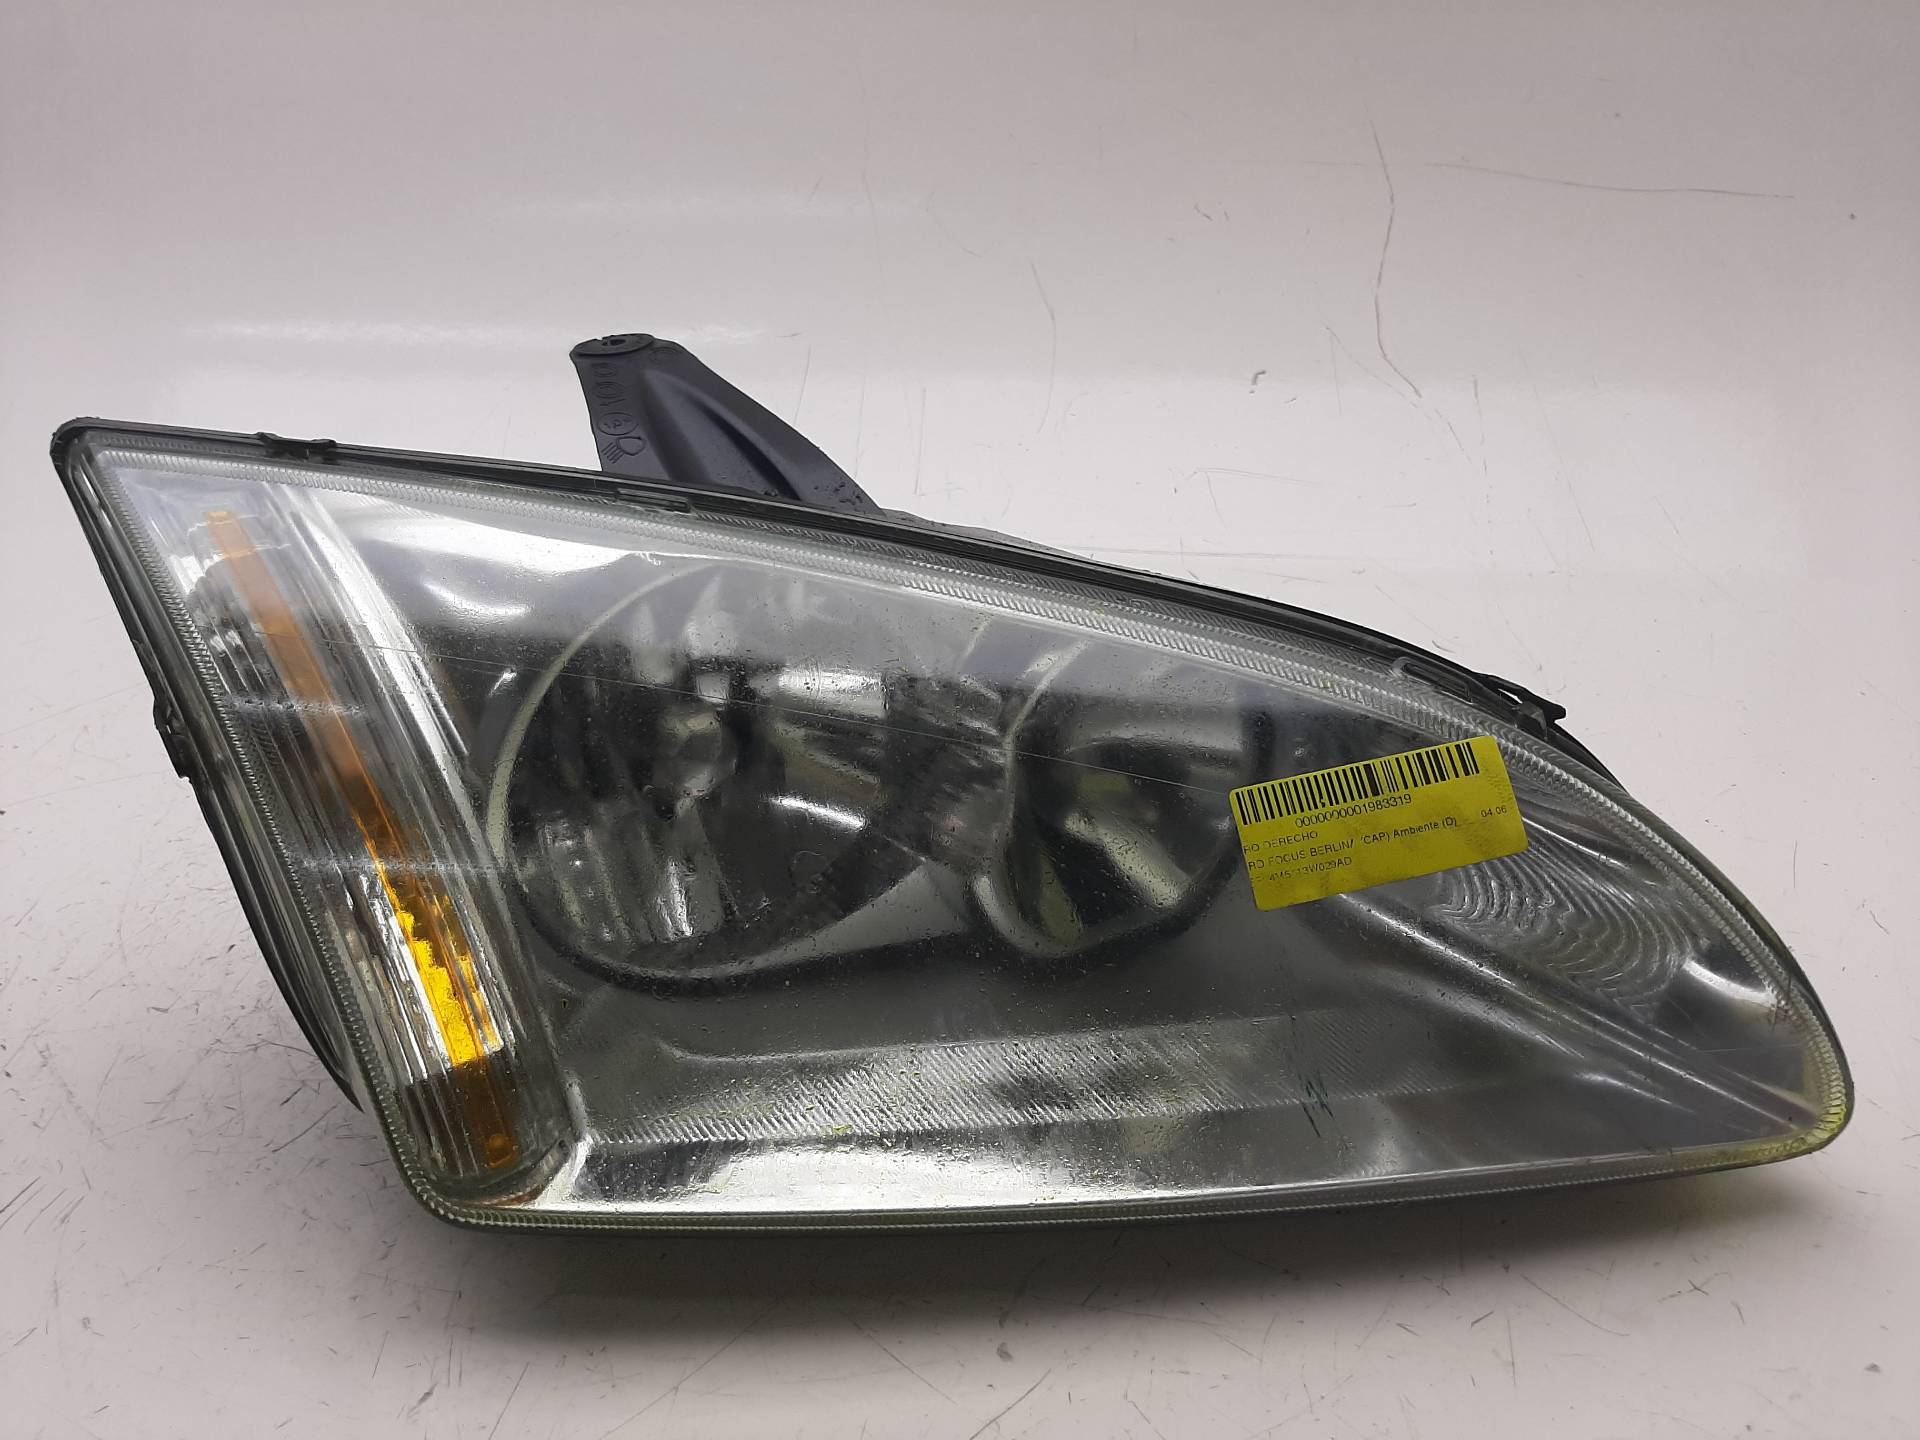 FORD Focus 2 generation (2004-2011) Front Right Headlight 4M5113W029AD 18570027